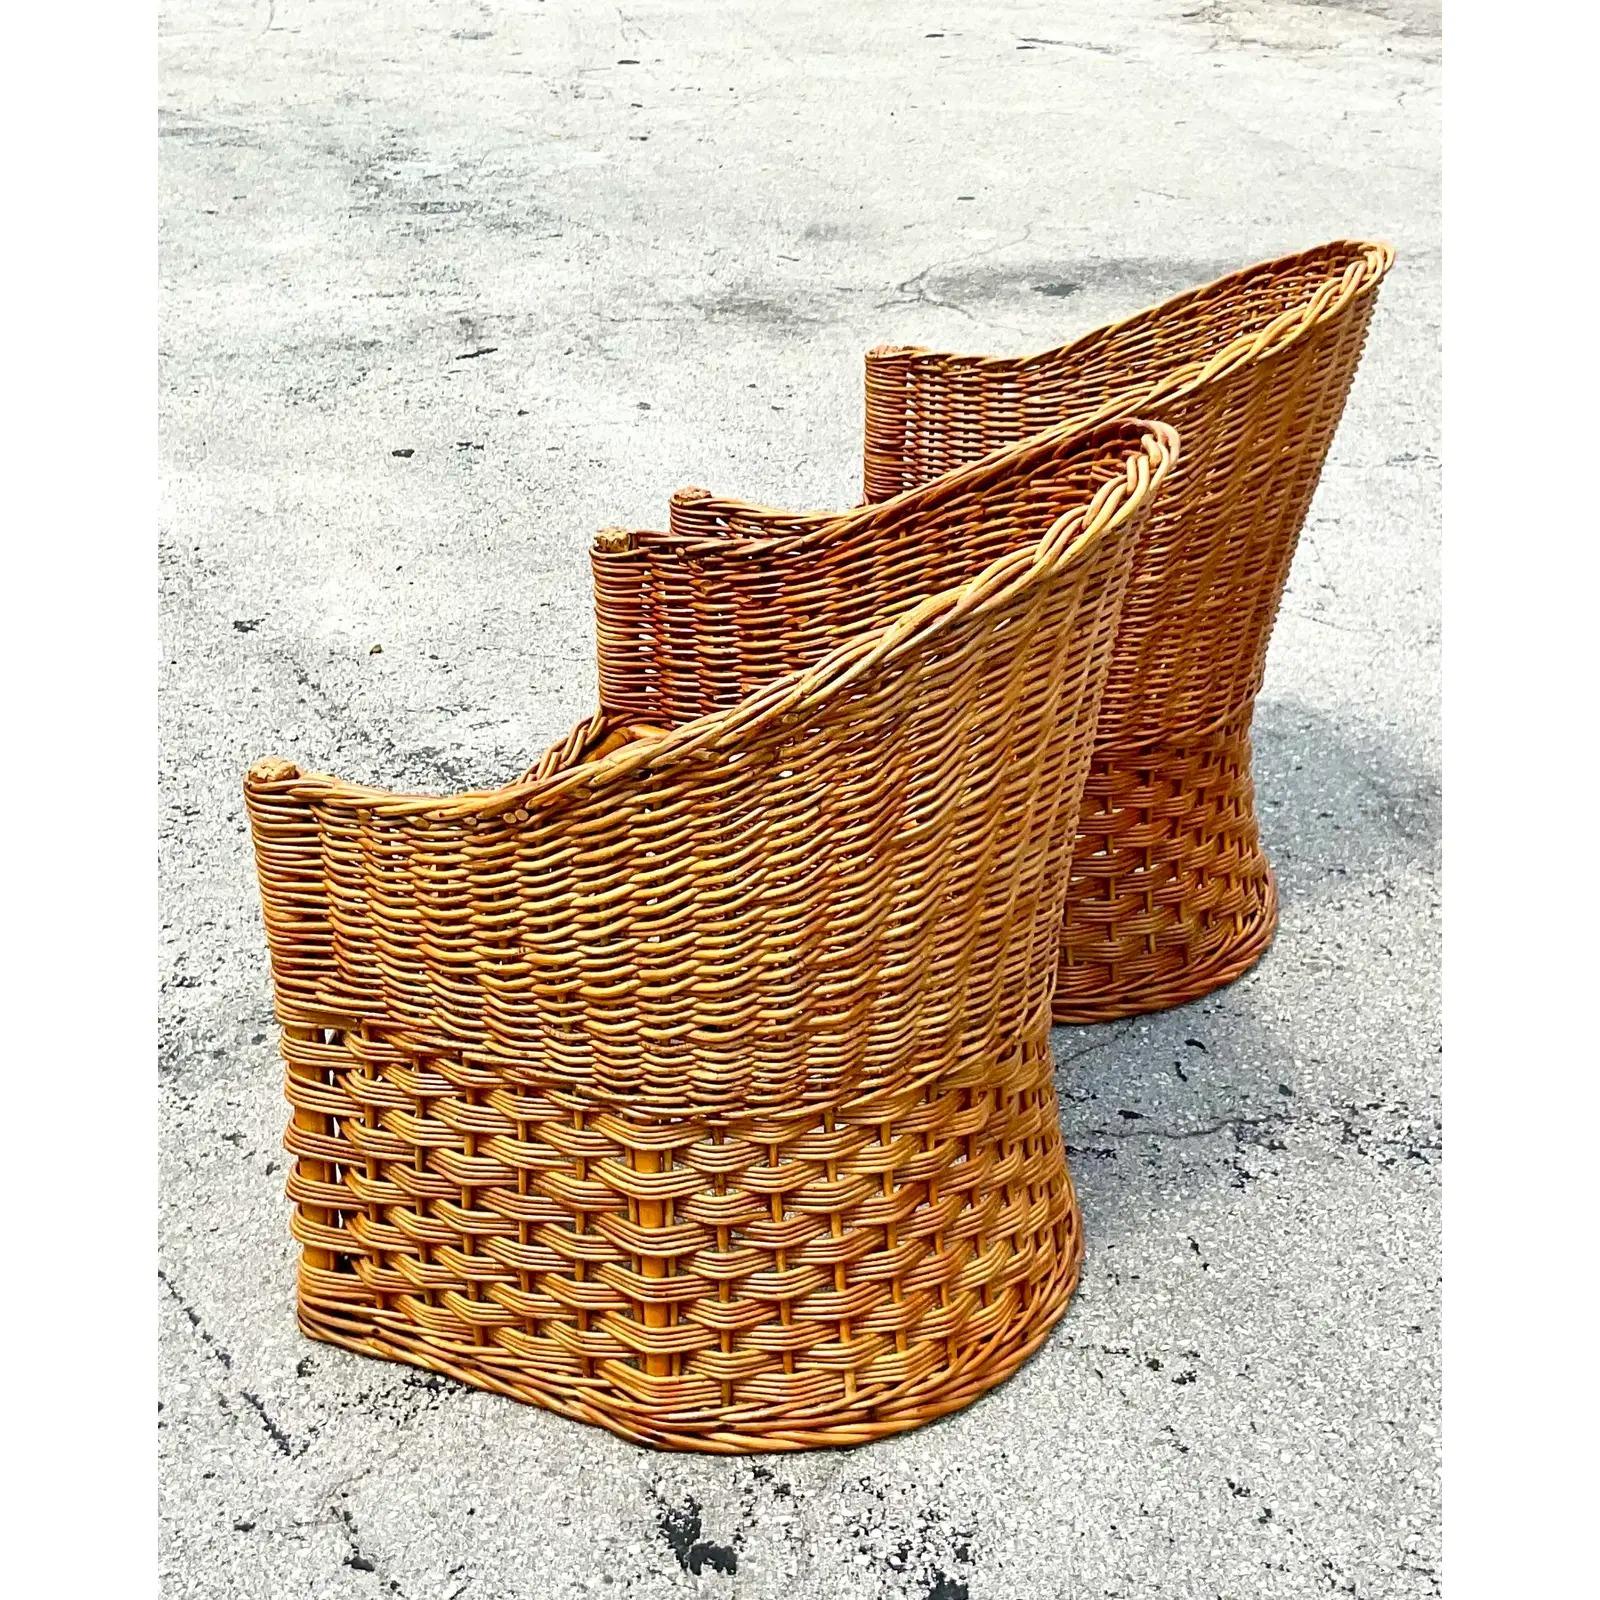 A stunning pair of vintage Coastal tub chairs. Beautiful woven rattan made by the Wicker Works group in Italy. Chic and clean shape. Acquired from a Palm Beach estate.